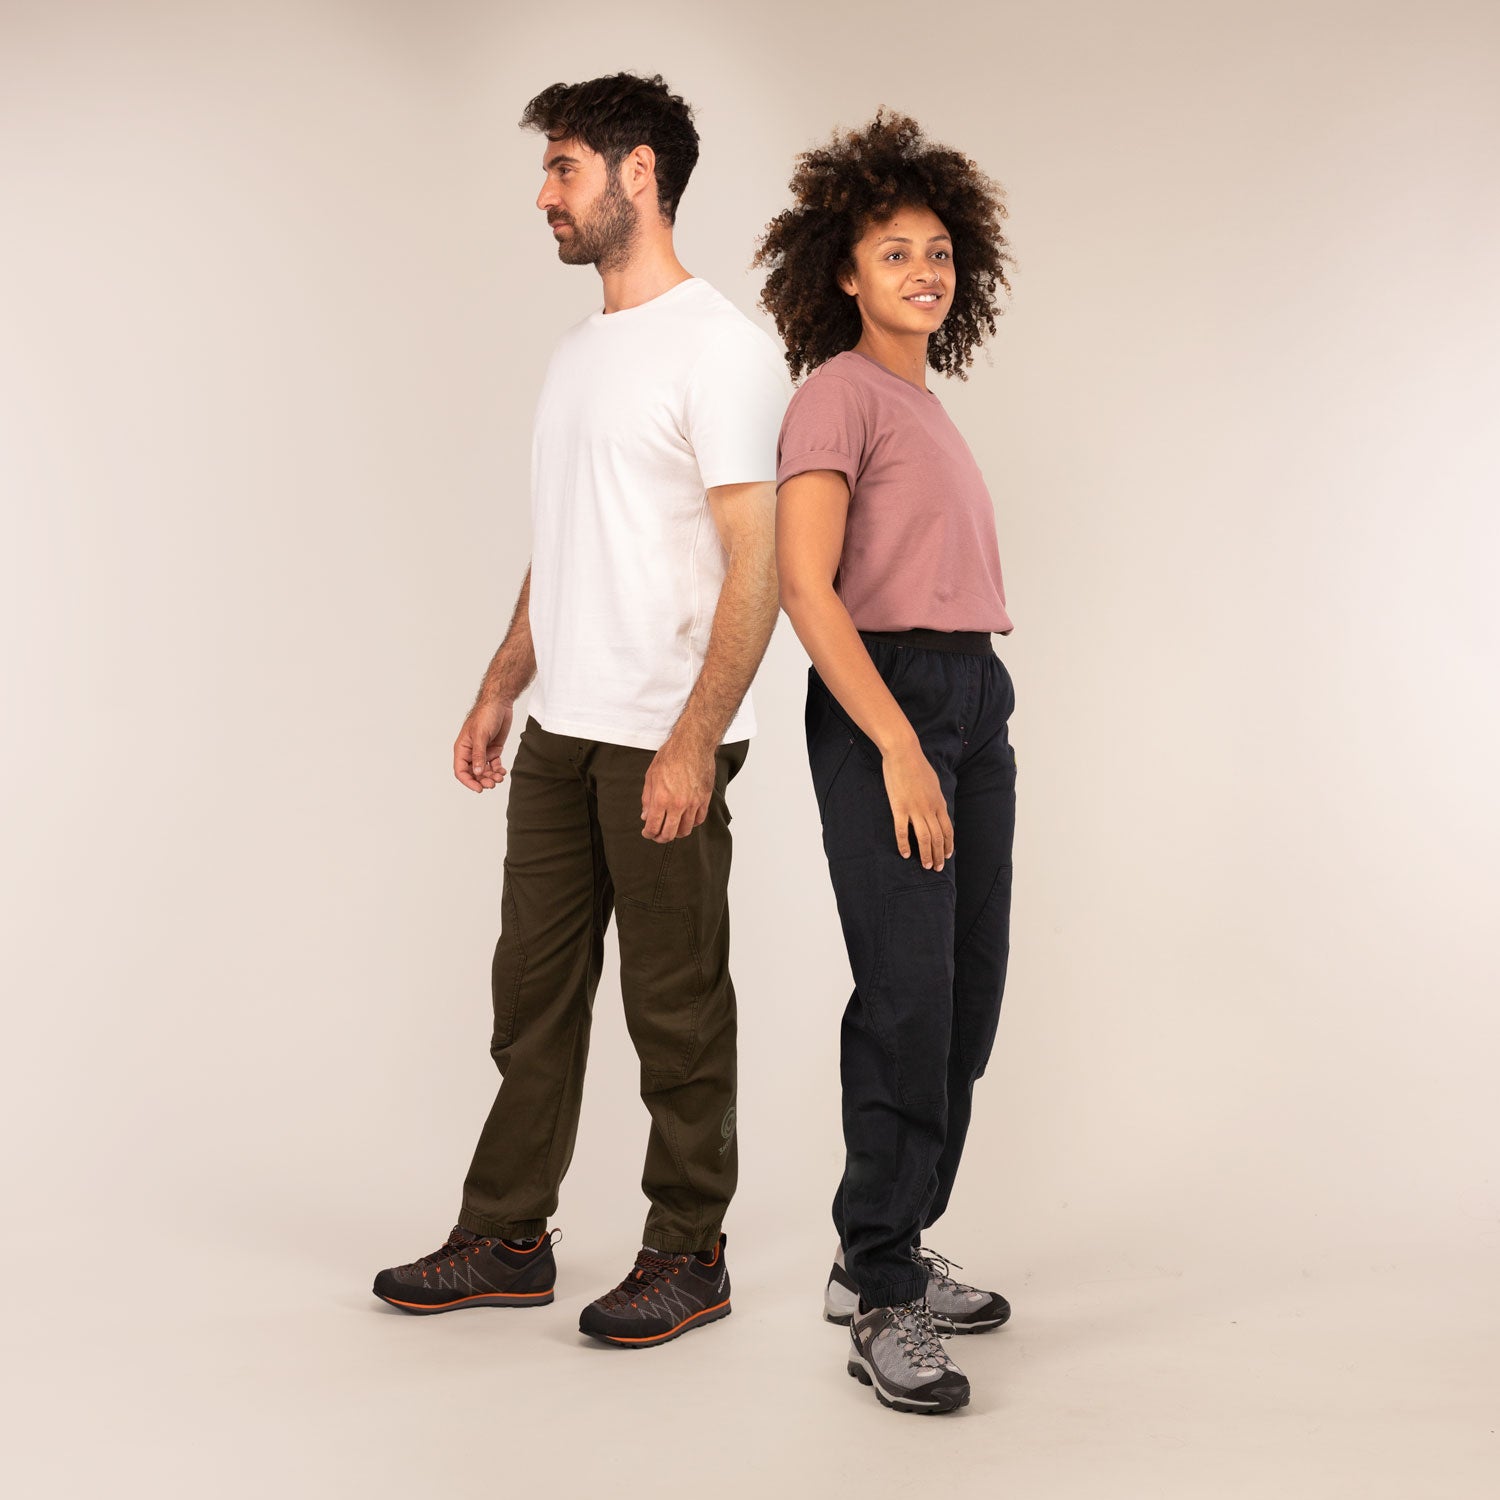 SUPERNOVA | Reinforced Oragnic Stretch Trousers  | 3RD ROCK Clothing - Kendal is 5ft 7" with a 28" waist, 38" hips and wears a size 30/RL Oliver is 6ft 2" with a 34" waist, 40" hips and wears a 34/LL